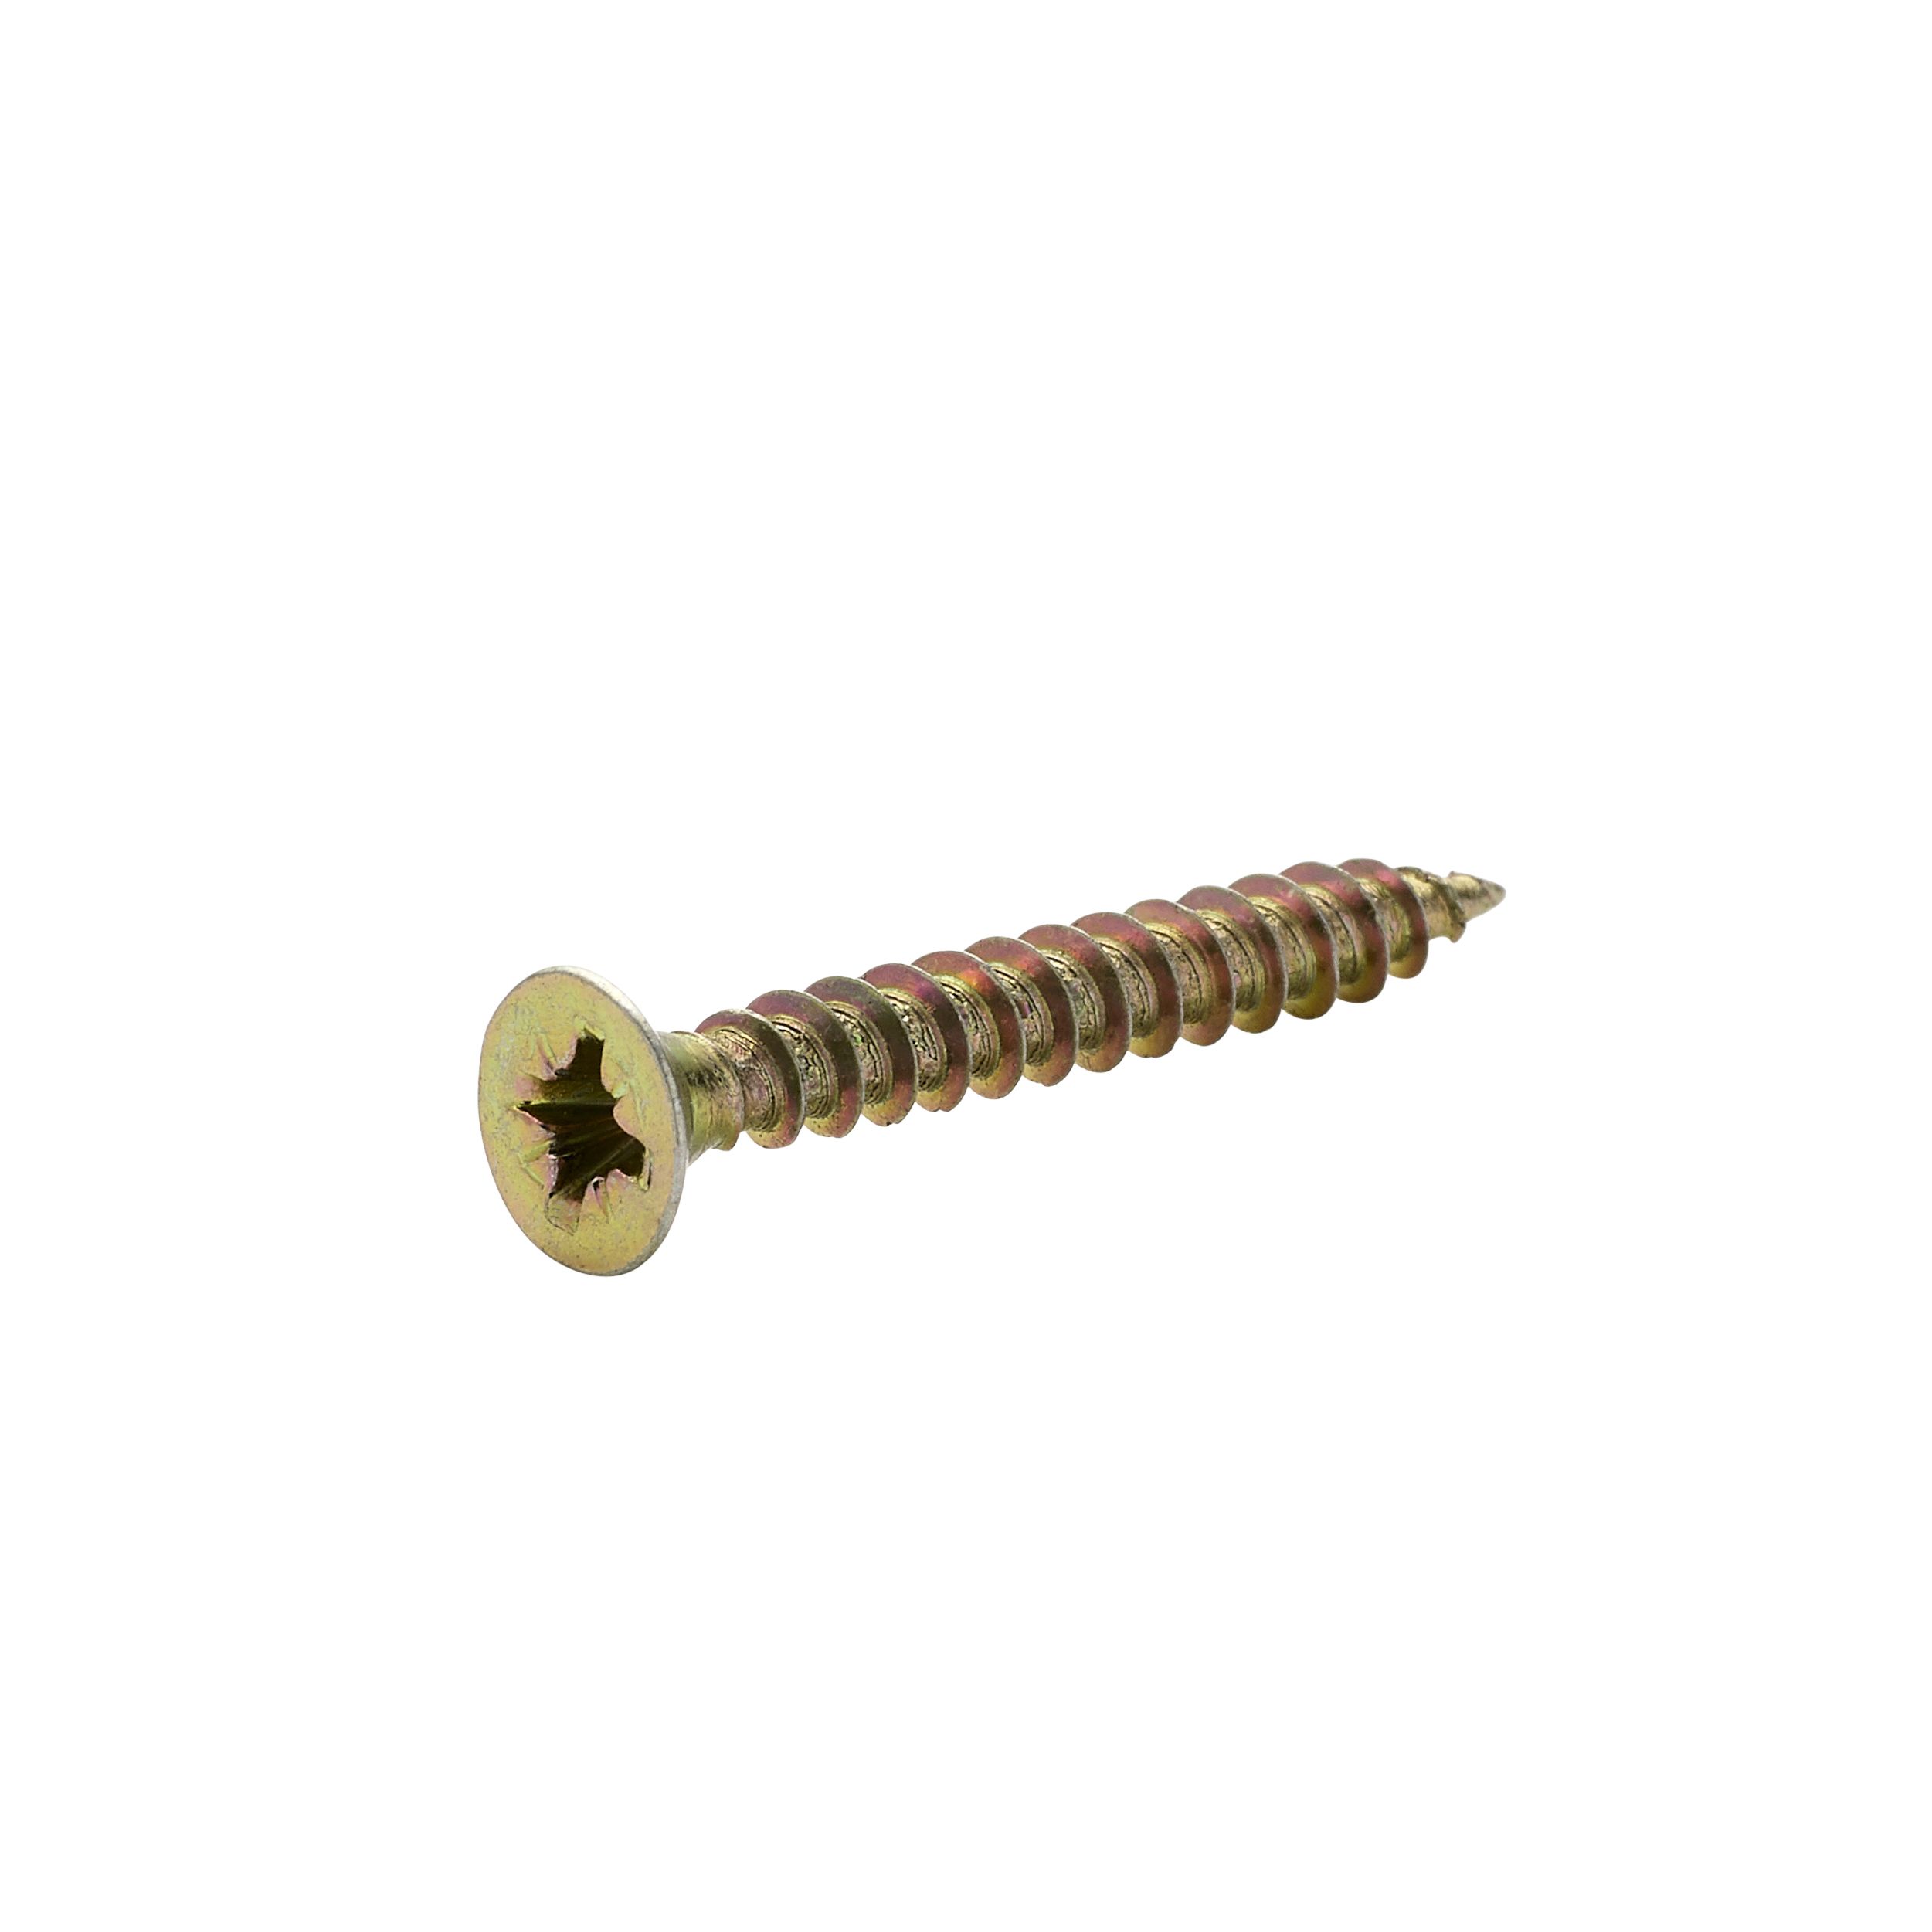 Diall Yellow-passivated Carbon steel Screw (Dia)3mm (L)25mm, Pack of 100